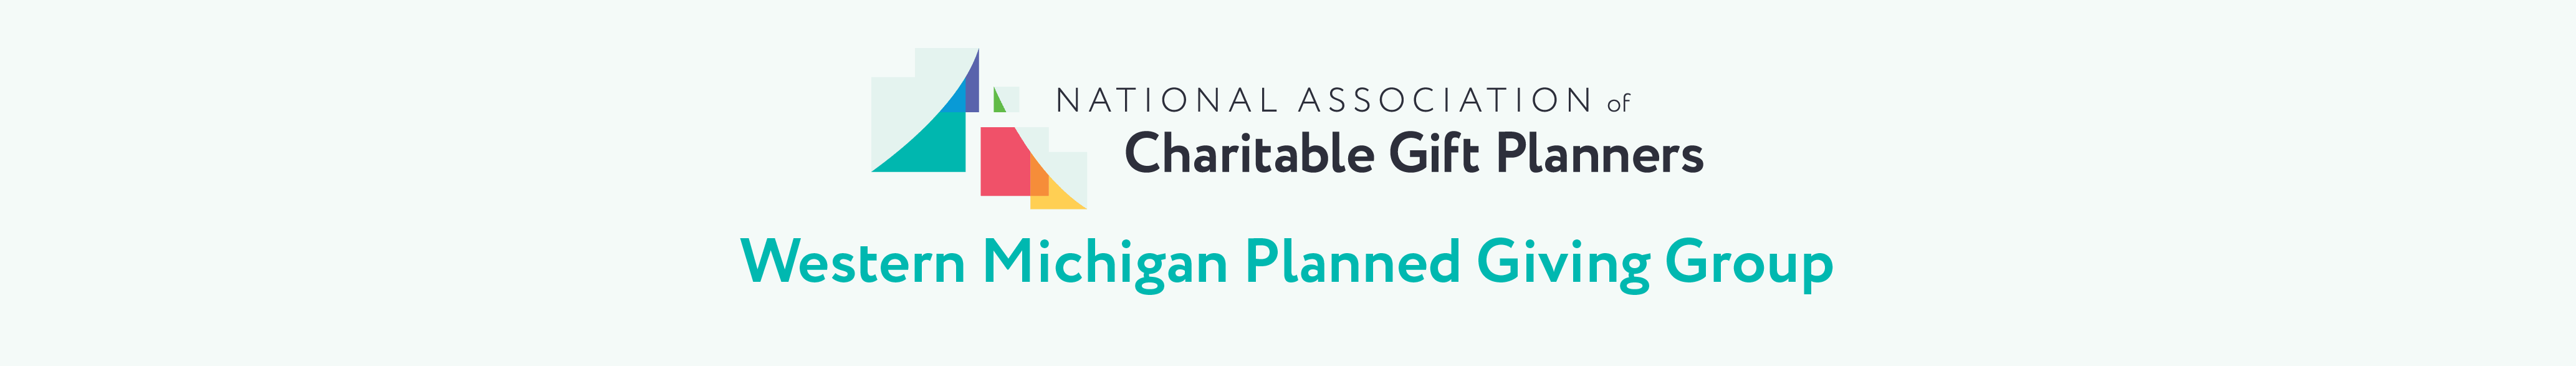 Western Michigan Planned Giving Group